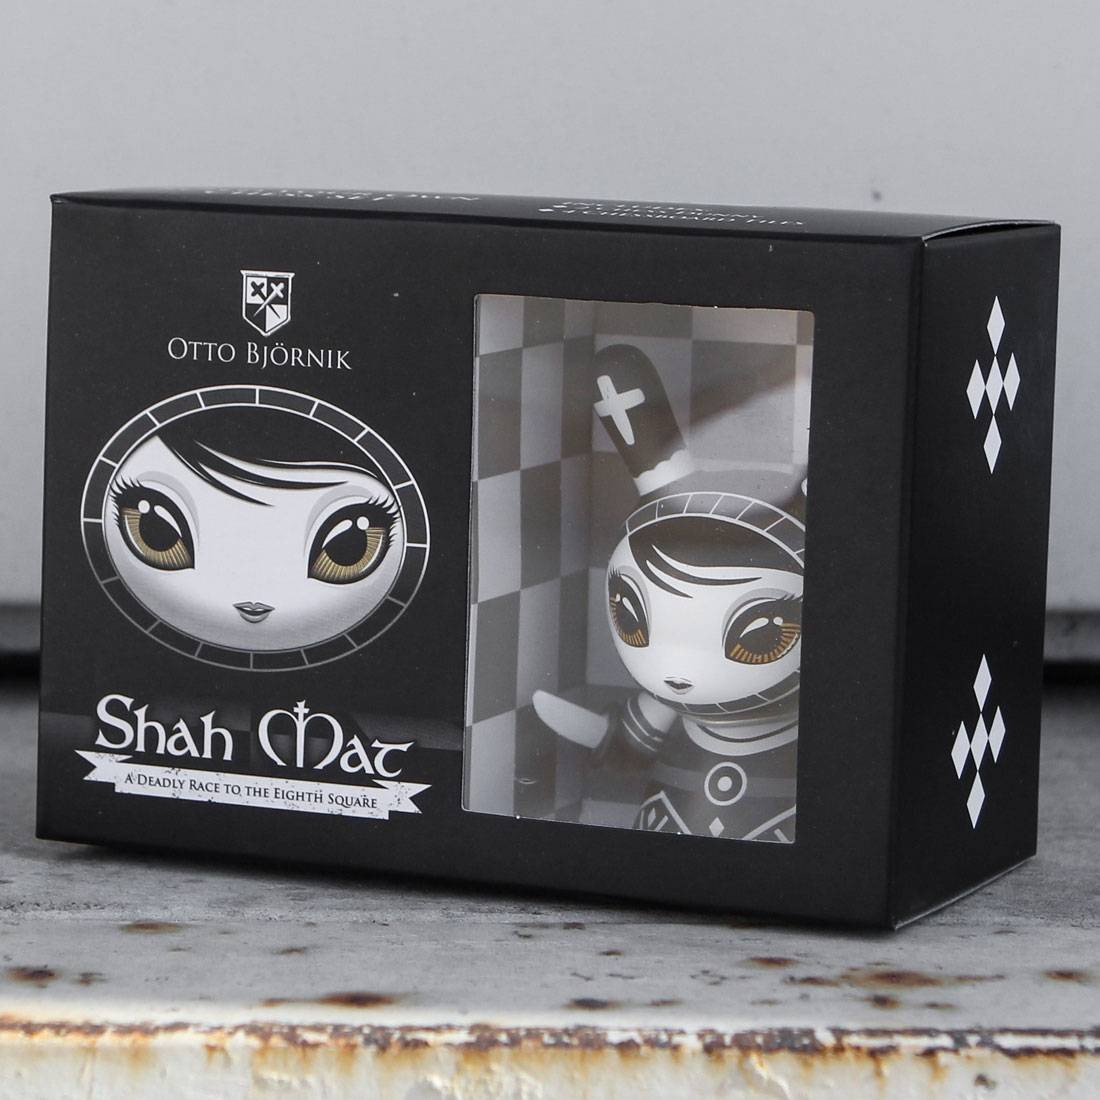 Shah Mat Otto Bjornik Dunny Chess Series New Sealed Display Case by Kidrobot 